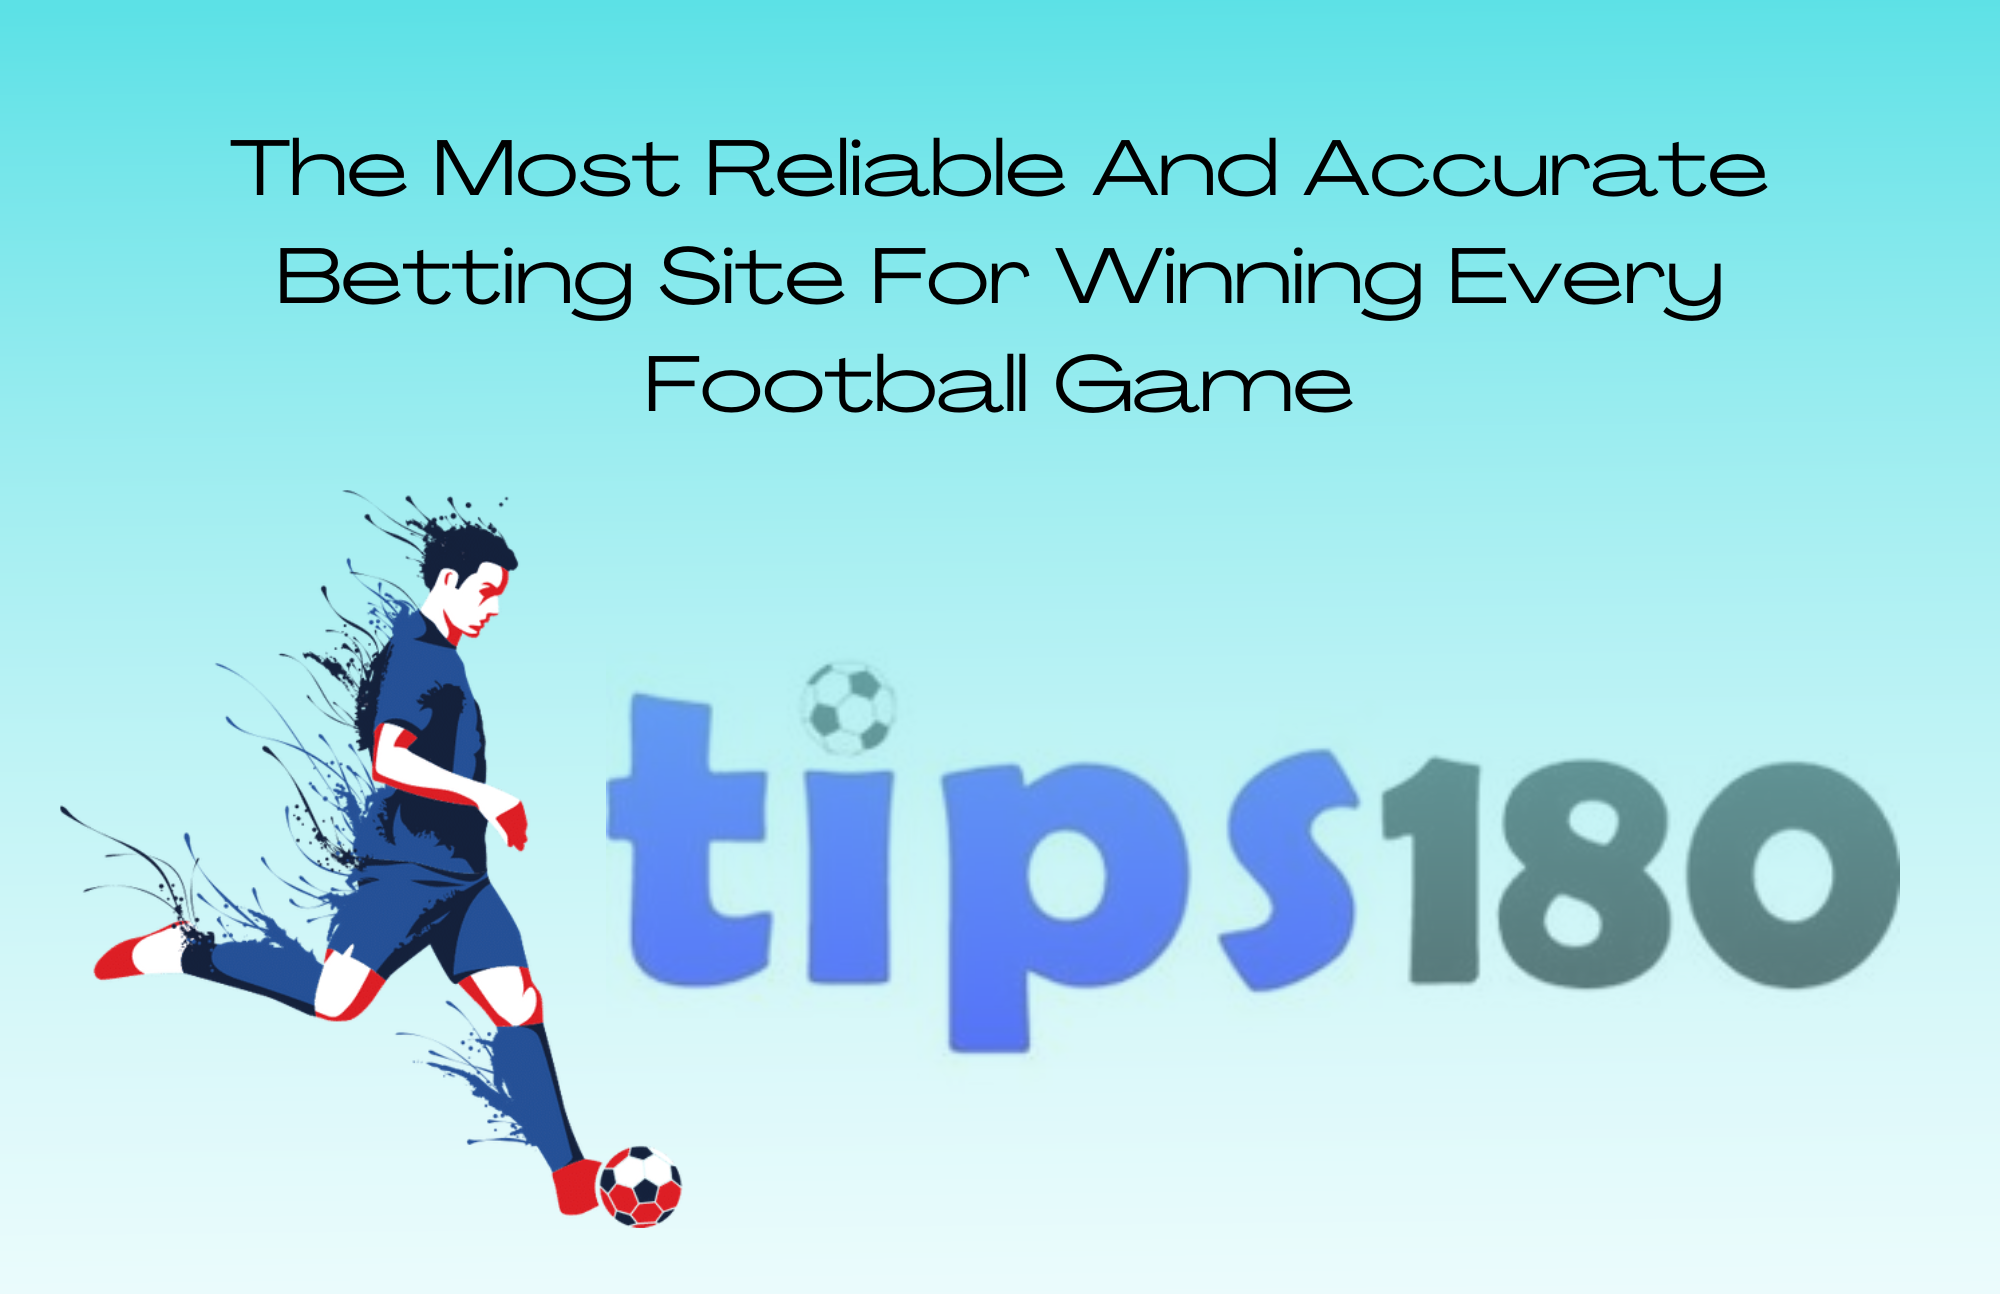 Tips180 - The Most Reliable And Accurate Betting Site For Winning Every Football Game